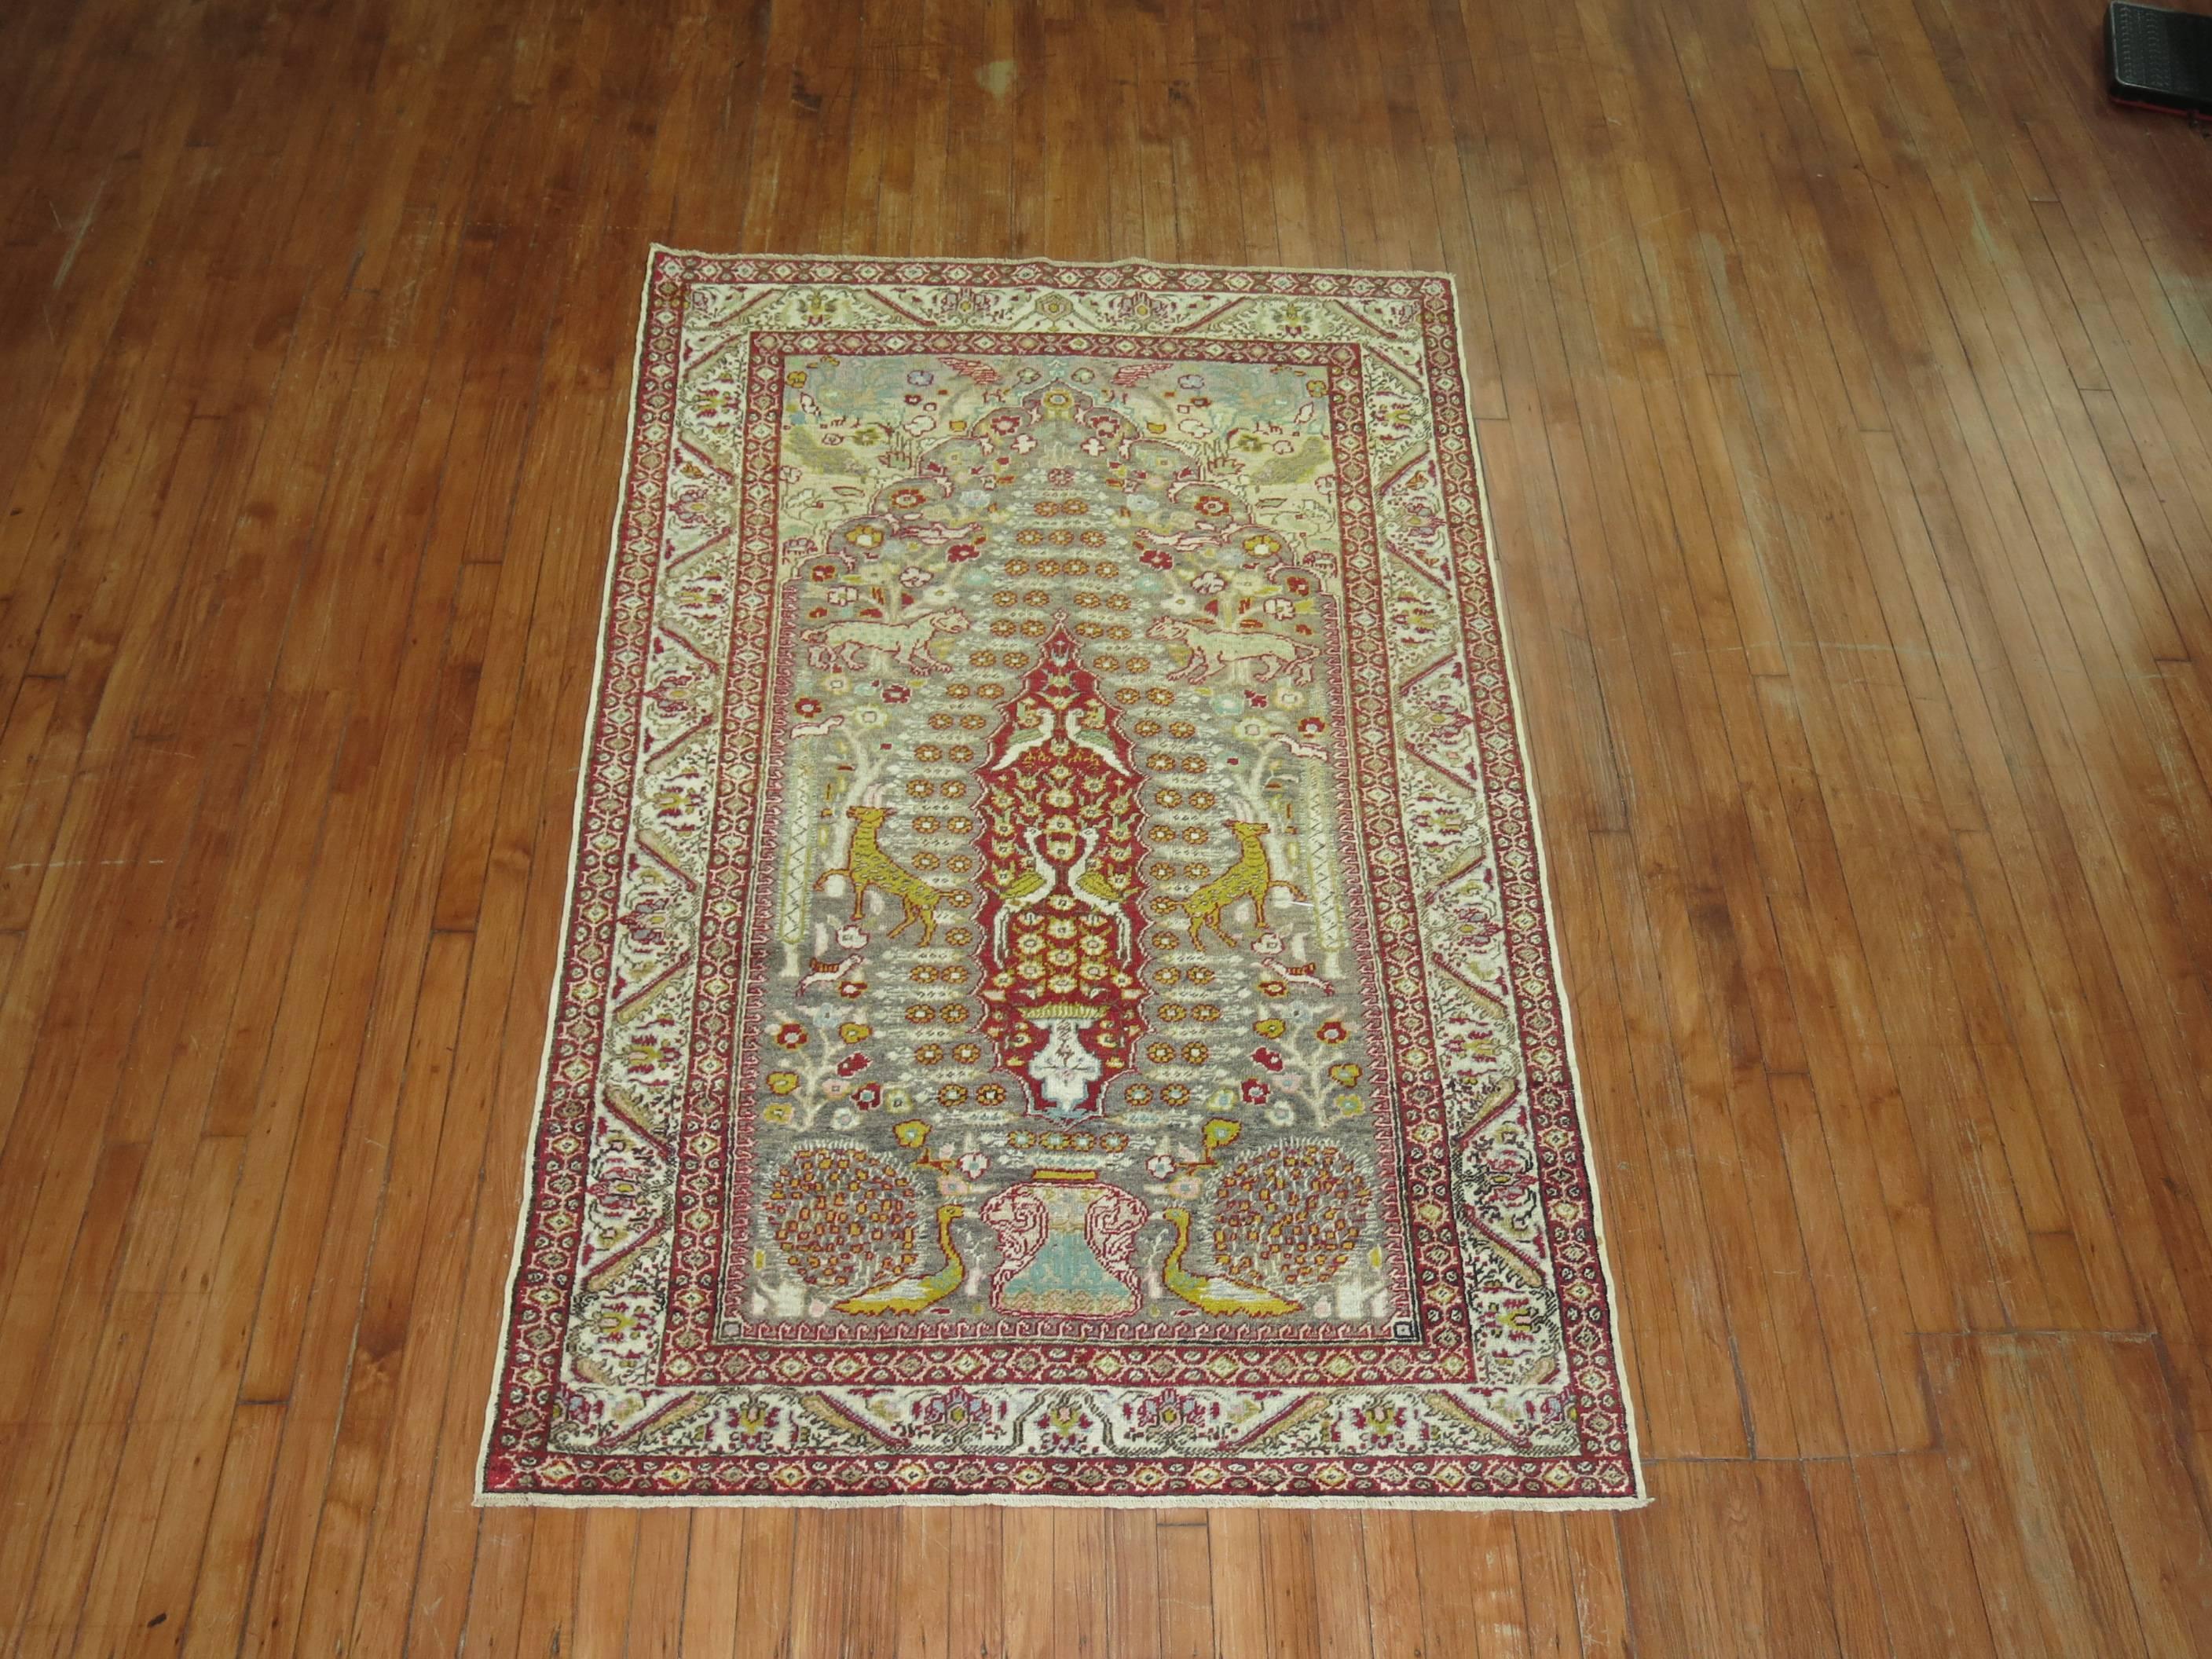 Zabihi Collection Animal Motif Turkish Pictorial Rug In Good Condition For Sale In New York, NY